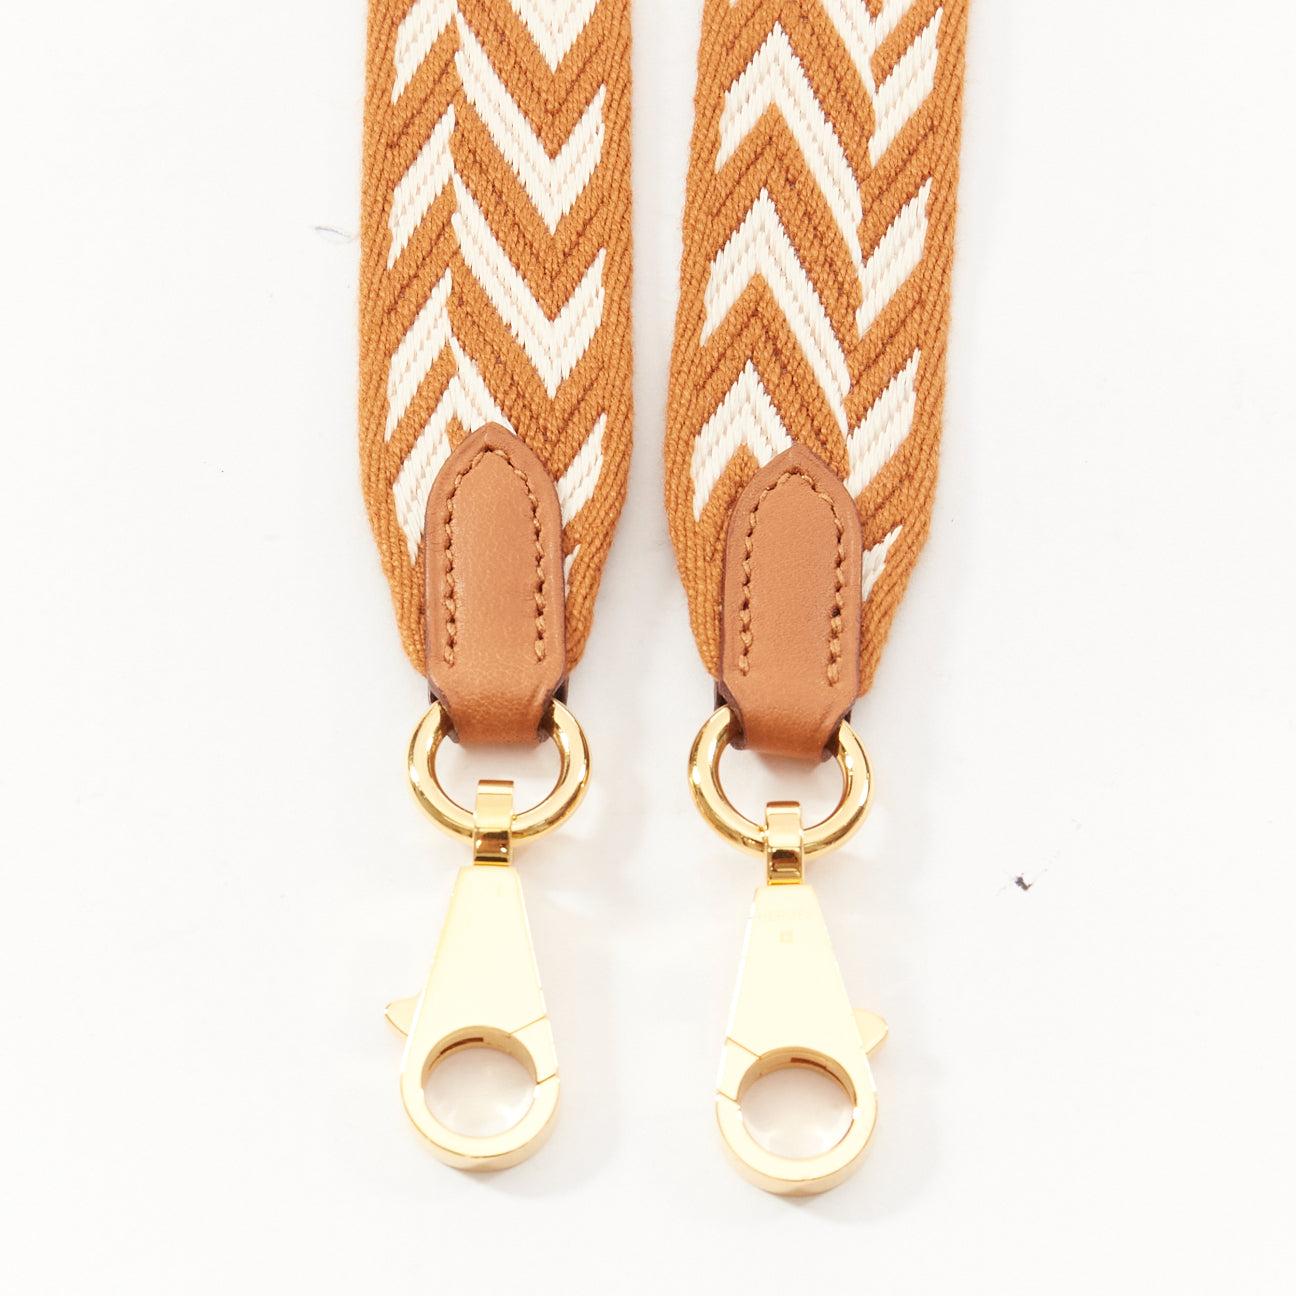 HERMES Sangle 25 brown white chevron stripes woven fabric gold hardware bag strap
Reference: AAWC/A01176
Brand: Hermes
Model: Sangle 25
Material: Canvas
Color: Brown, White
Pattern: Chevron
Closure: Lobster Clasp
Lining: Multicolour Canvas
Made in: